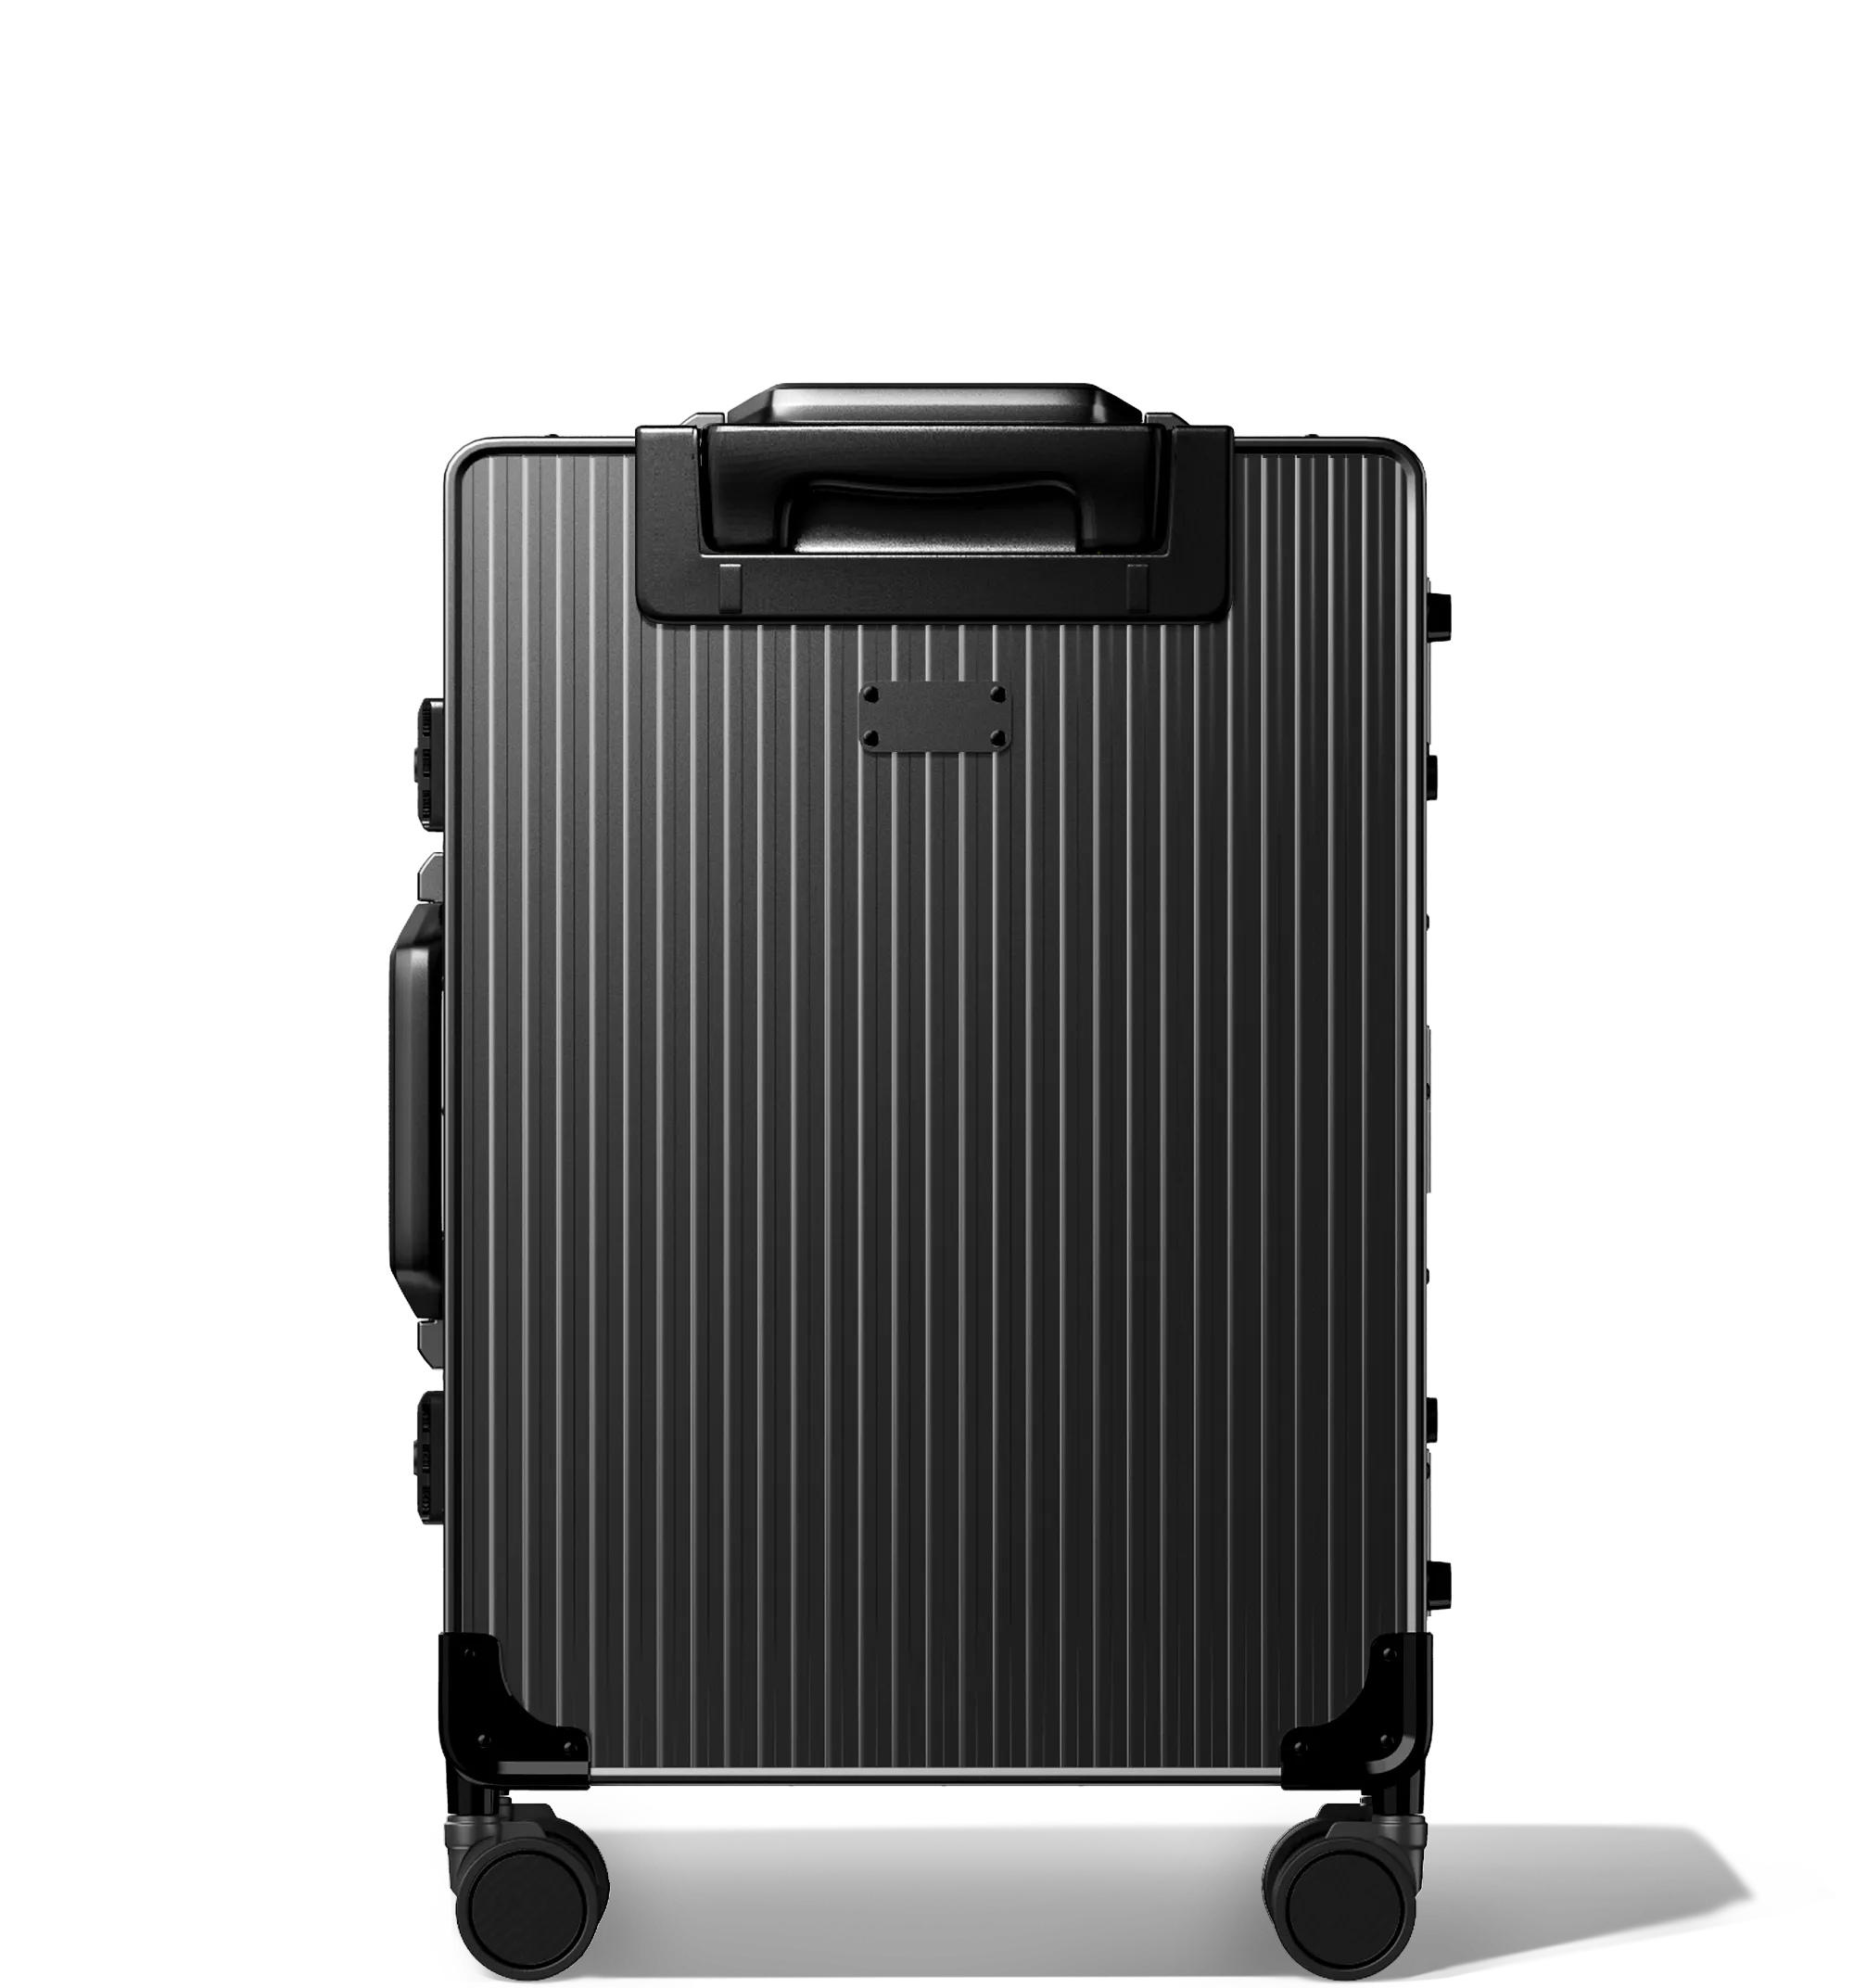 Frontal view of a black Cabin in 56/20 , vertical hard-shell aluminium Luggage with ribbed texture, featuring a top handle, side latches, and four multi-directional spinner wheels, against a white background.